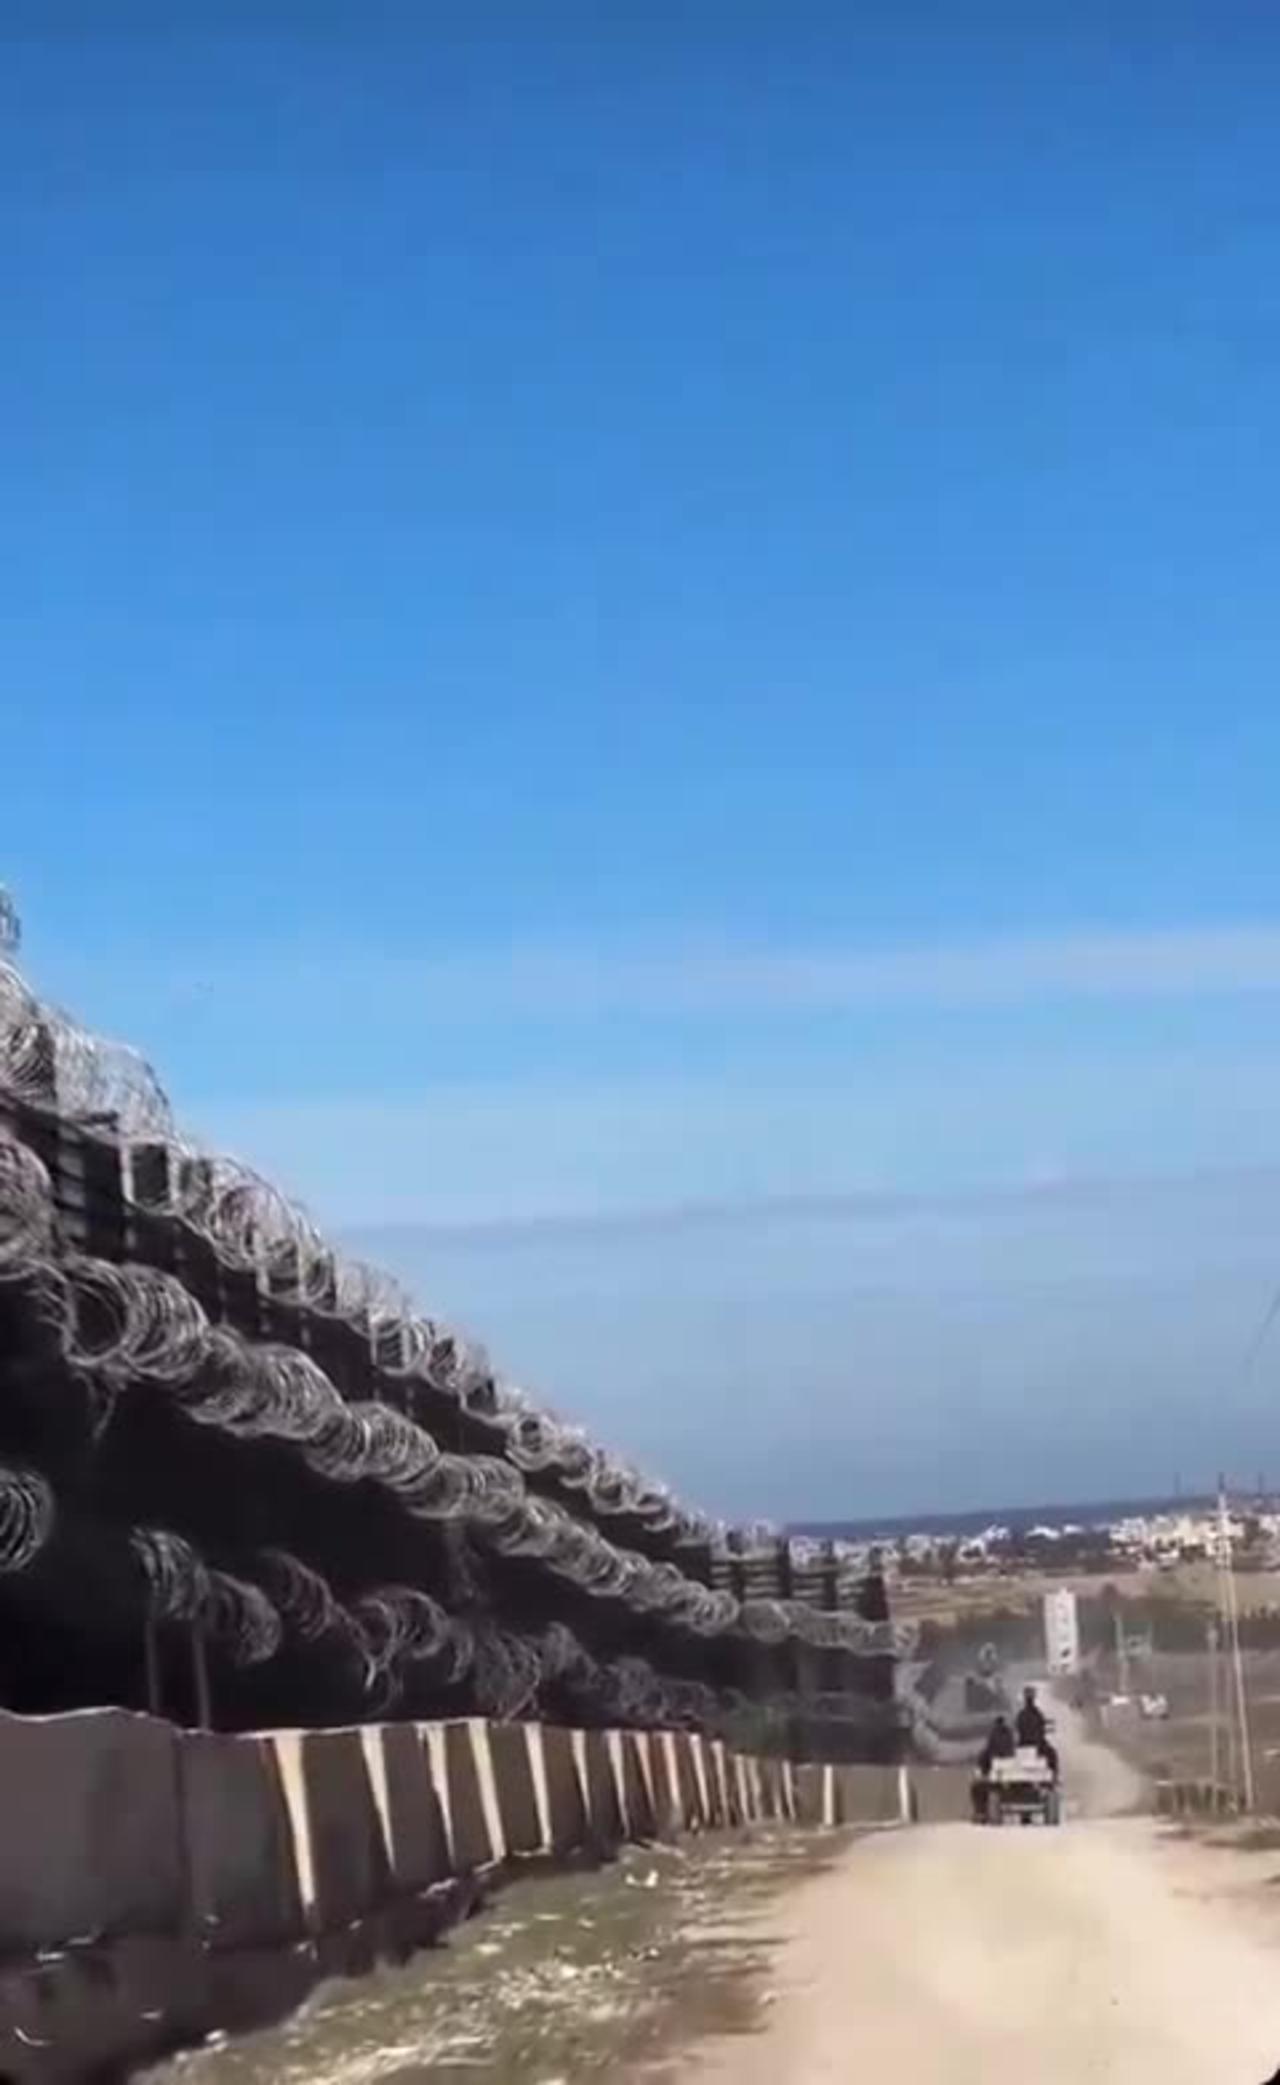 This is Egypt’s border wall with Gaza